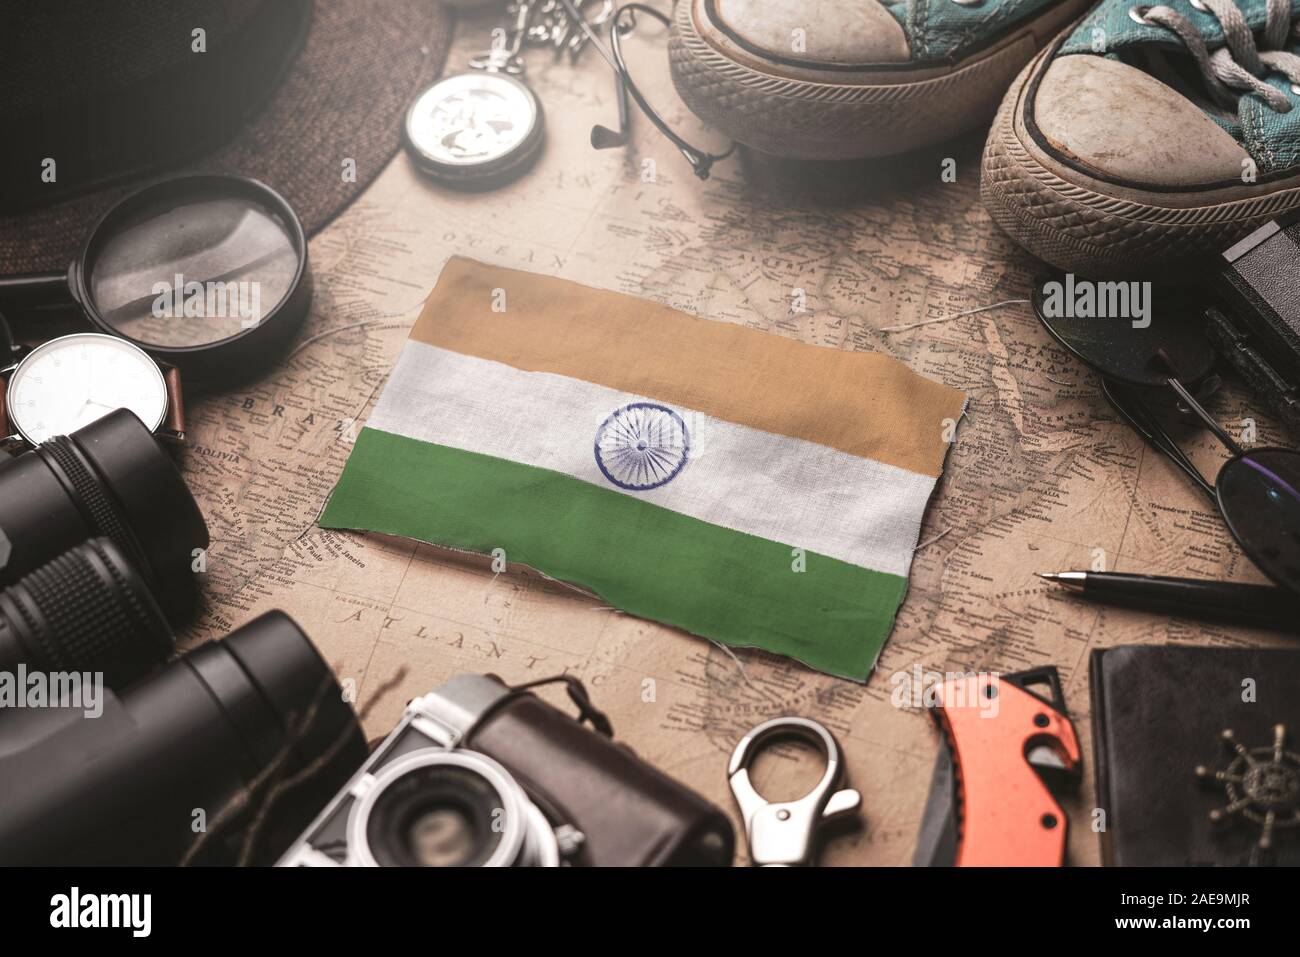 India Flag Between Traveler's Accessories on Old Vintage Map. Tourist Destination Concept. Stock Photo